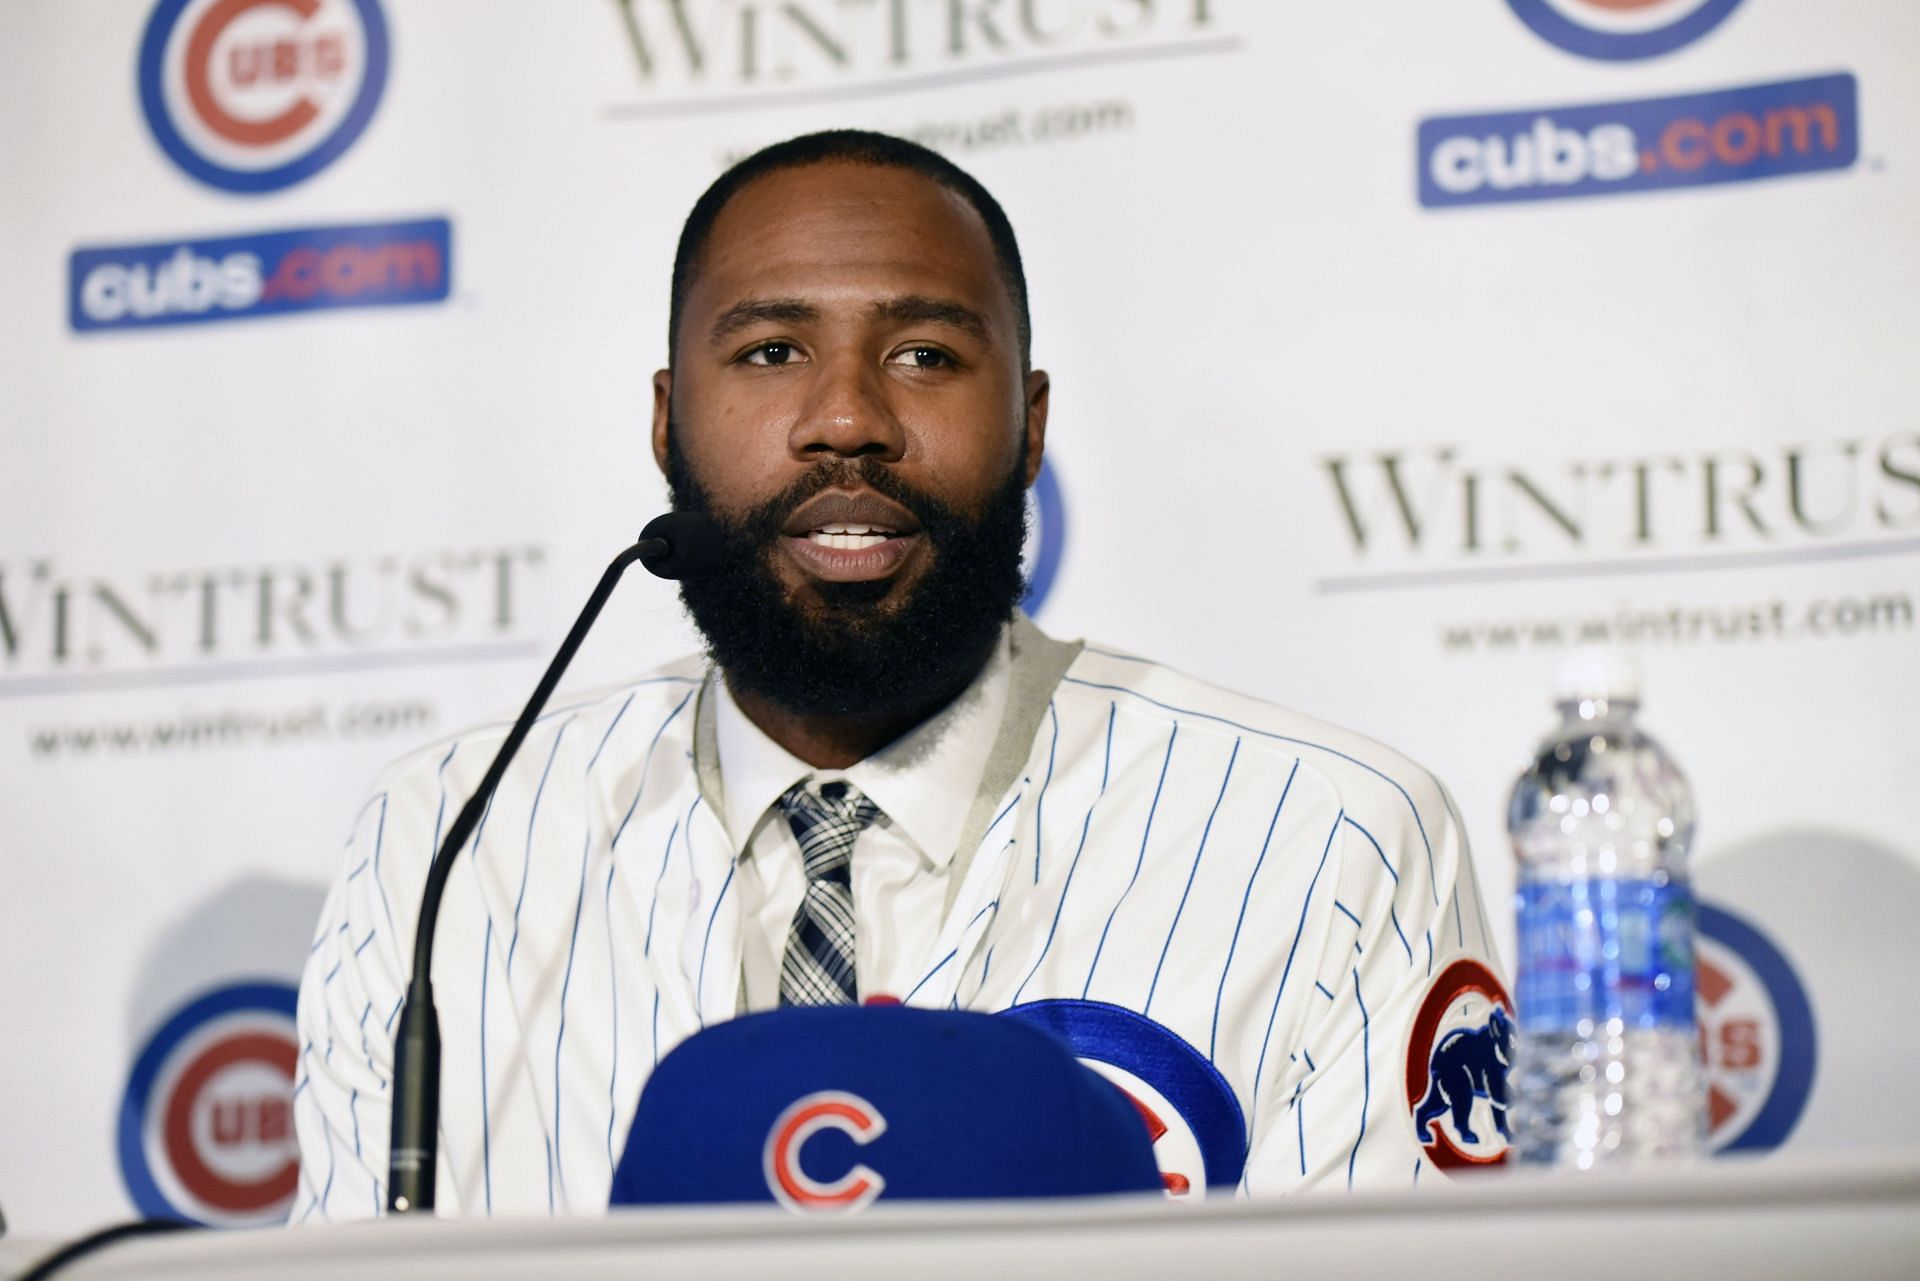 Heyward made controversial comments on the Cardinals in 2018.